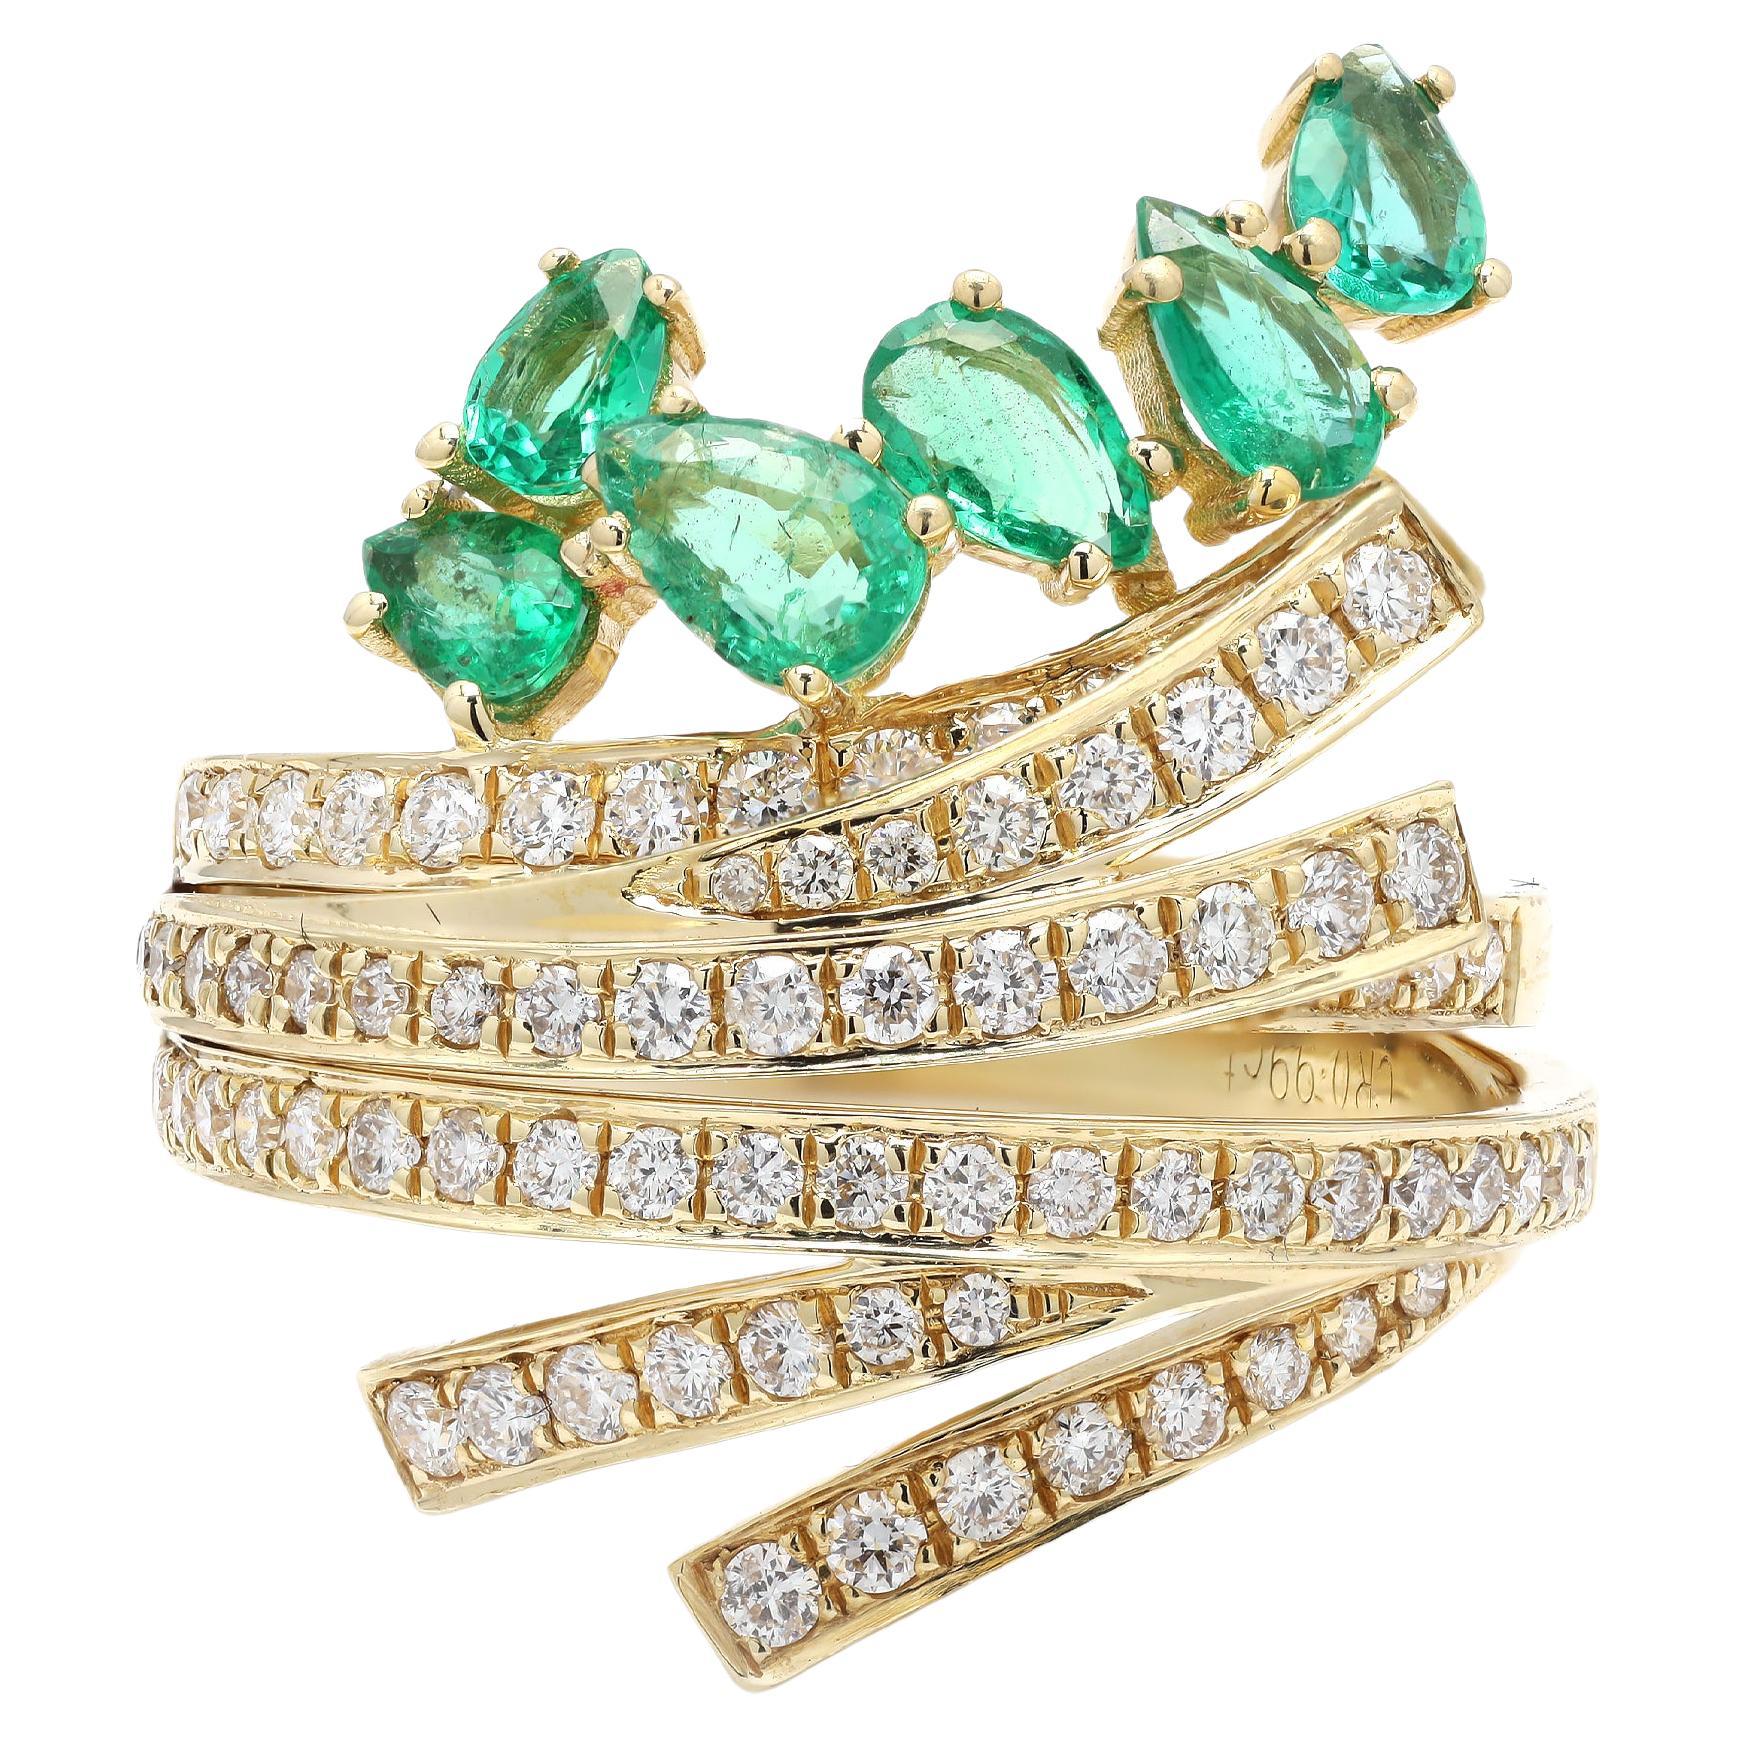 For Sale:  Modern Solid 14k Yellow Gold Diamond Emerald Wedding Party Ring, Emerald Ring